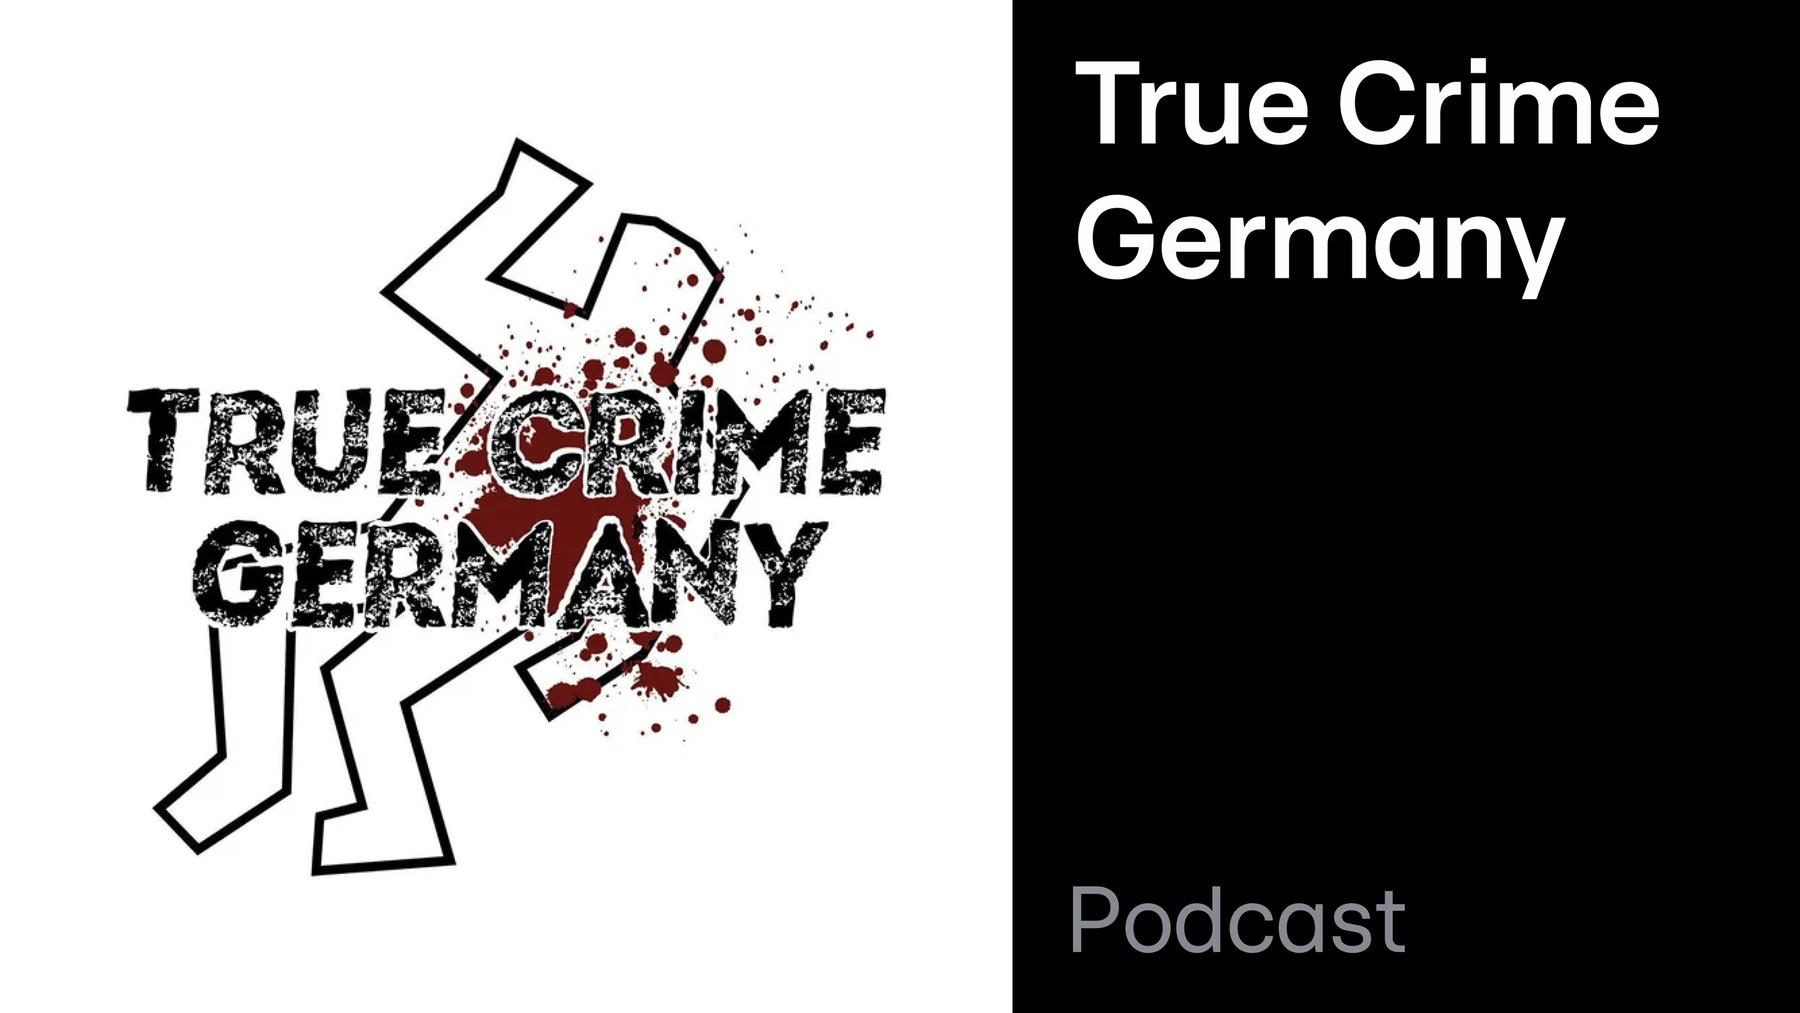 Podcast: True Crime Germany